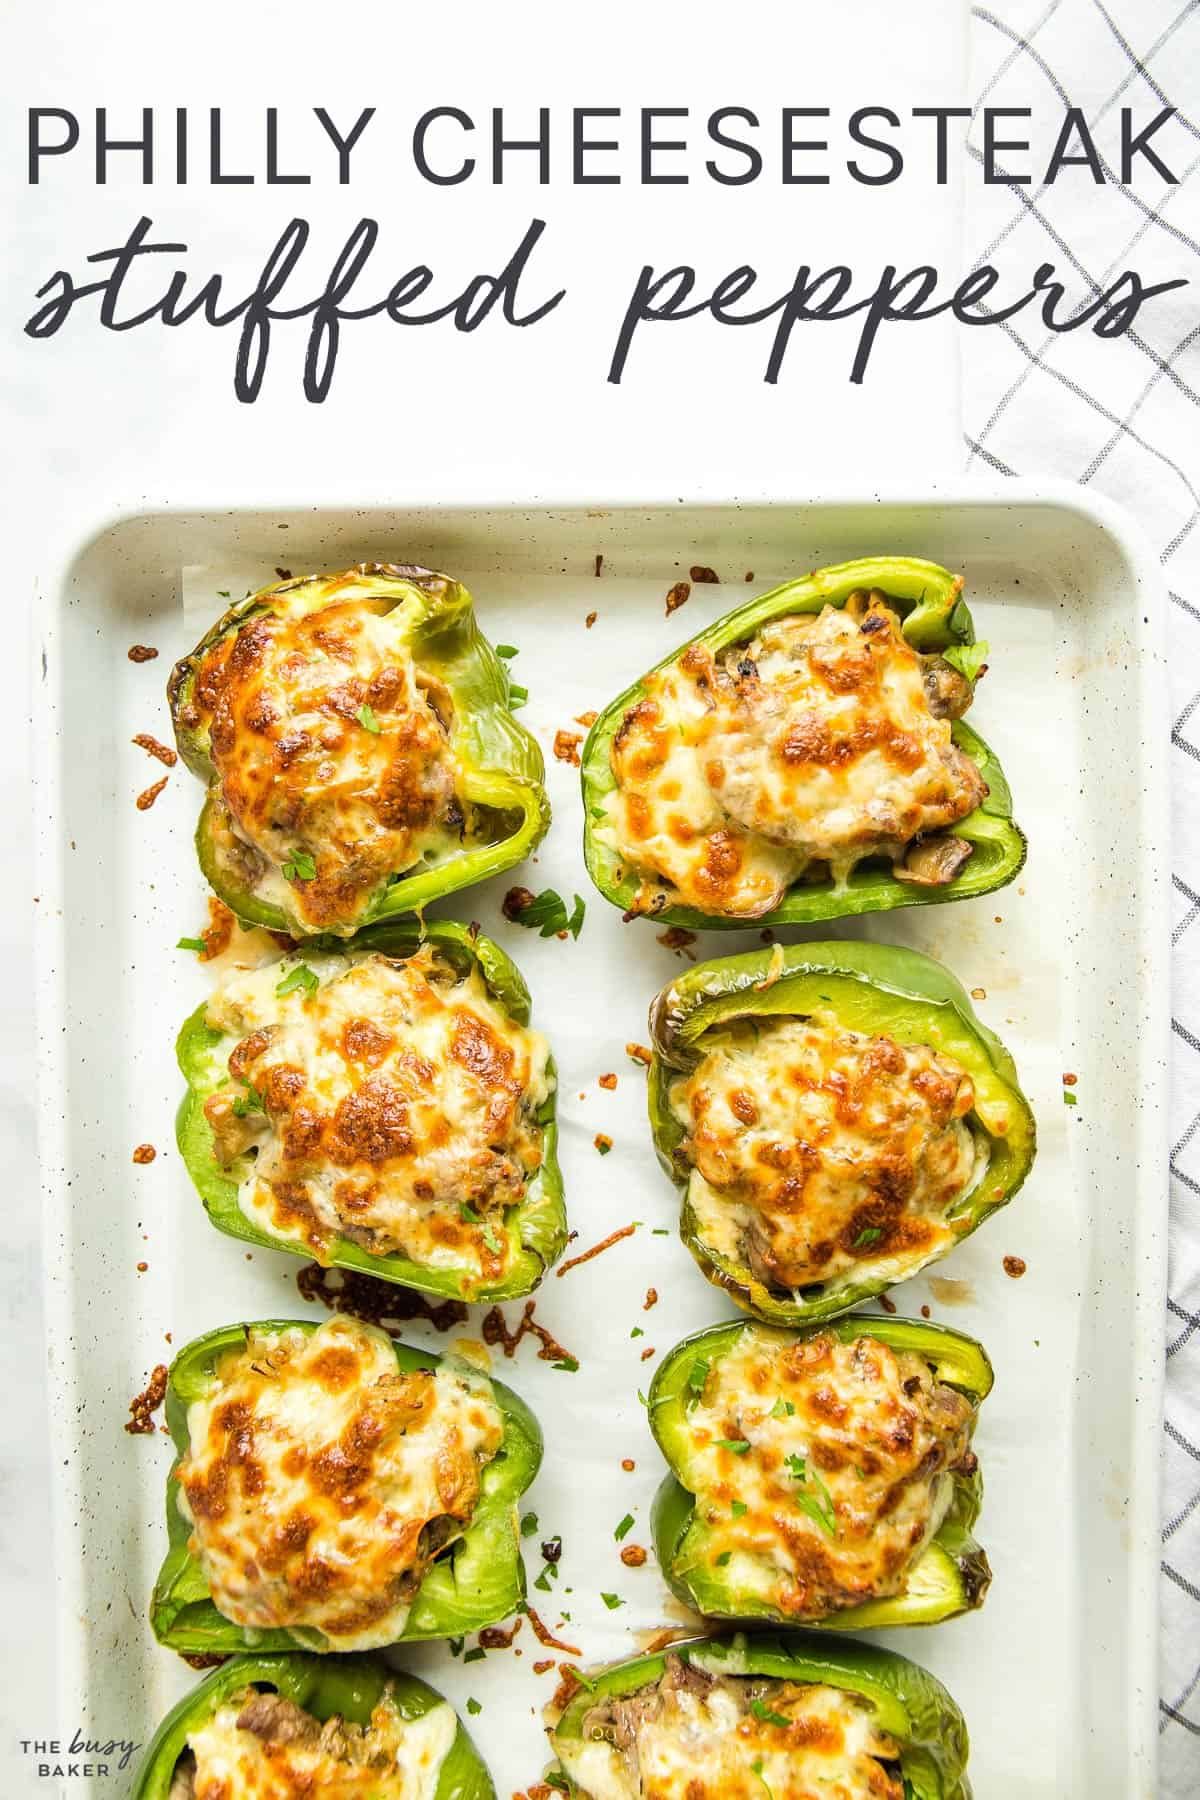 Philly cheesesteak stuffed peppers recipe